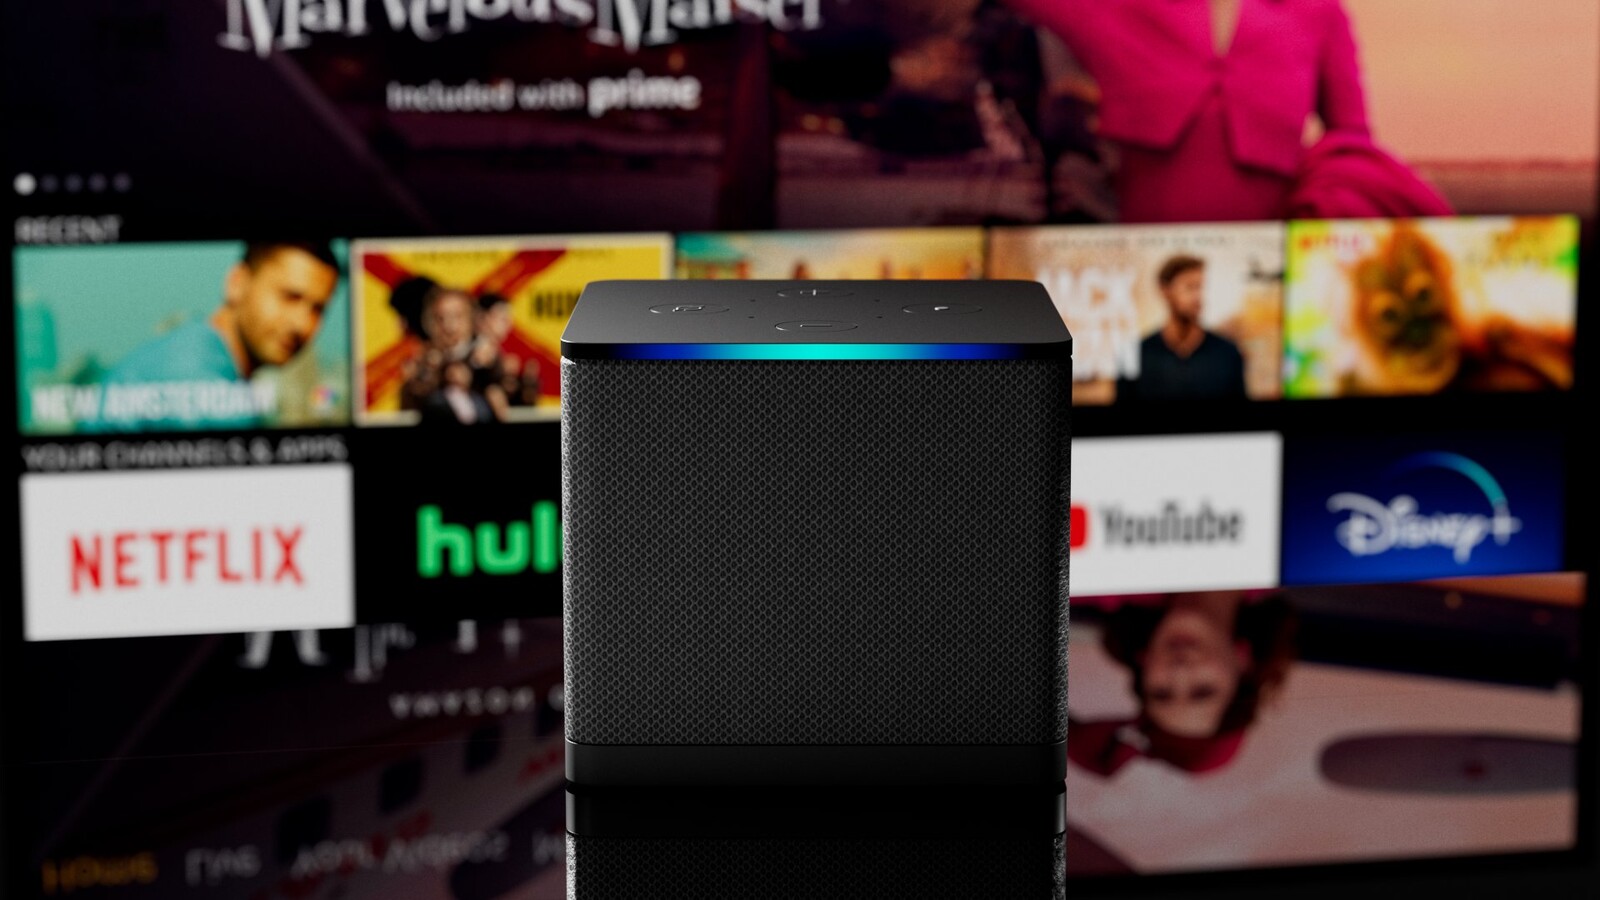 Amazon Fire TV Cube product render that I worked on using Maya. I did the lighting and compositing primarily in Maya and finishing touches and background TV using Photoshop